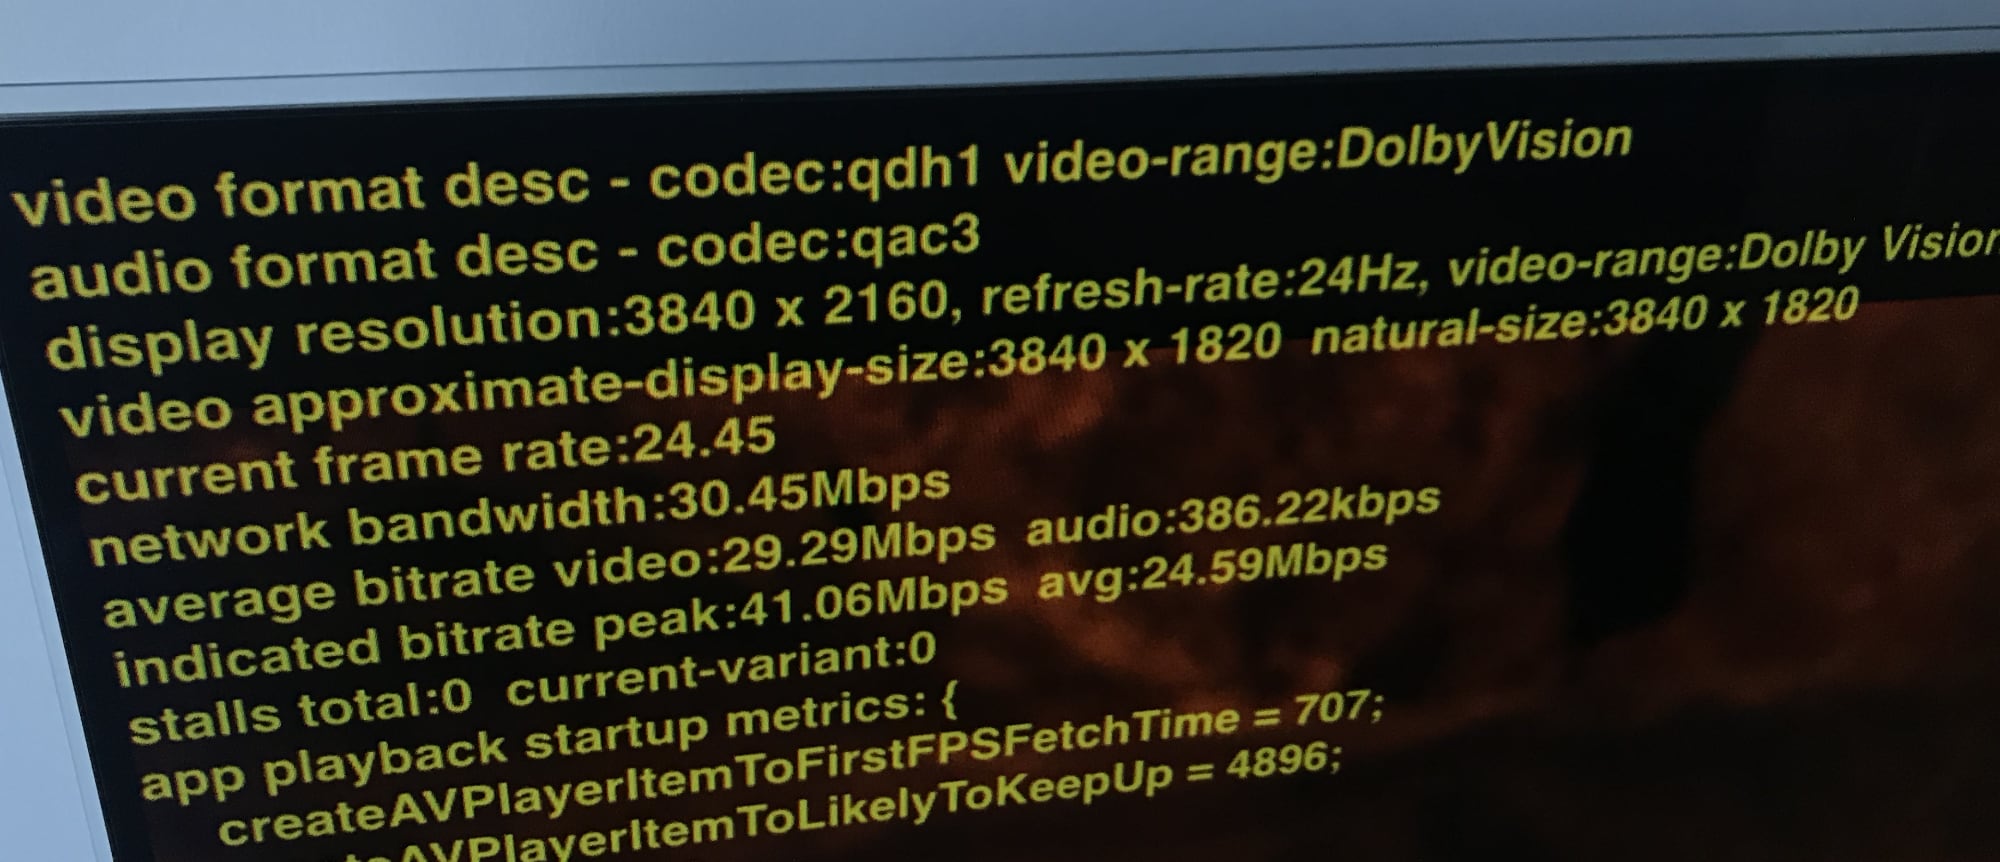 TV+ praised for its high bitrate streaming video quality - 9to5Mac